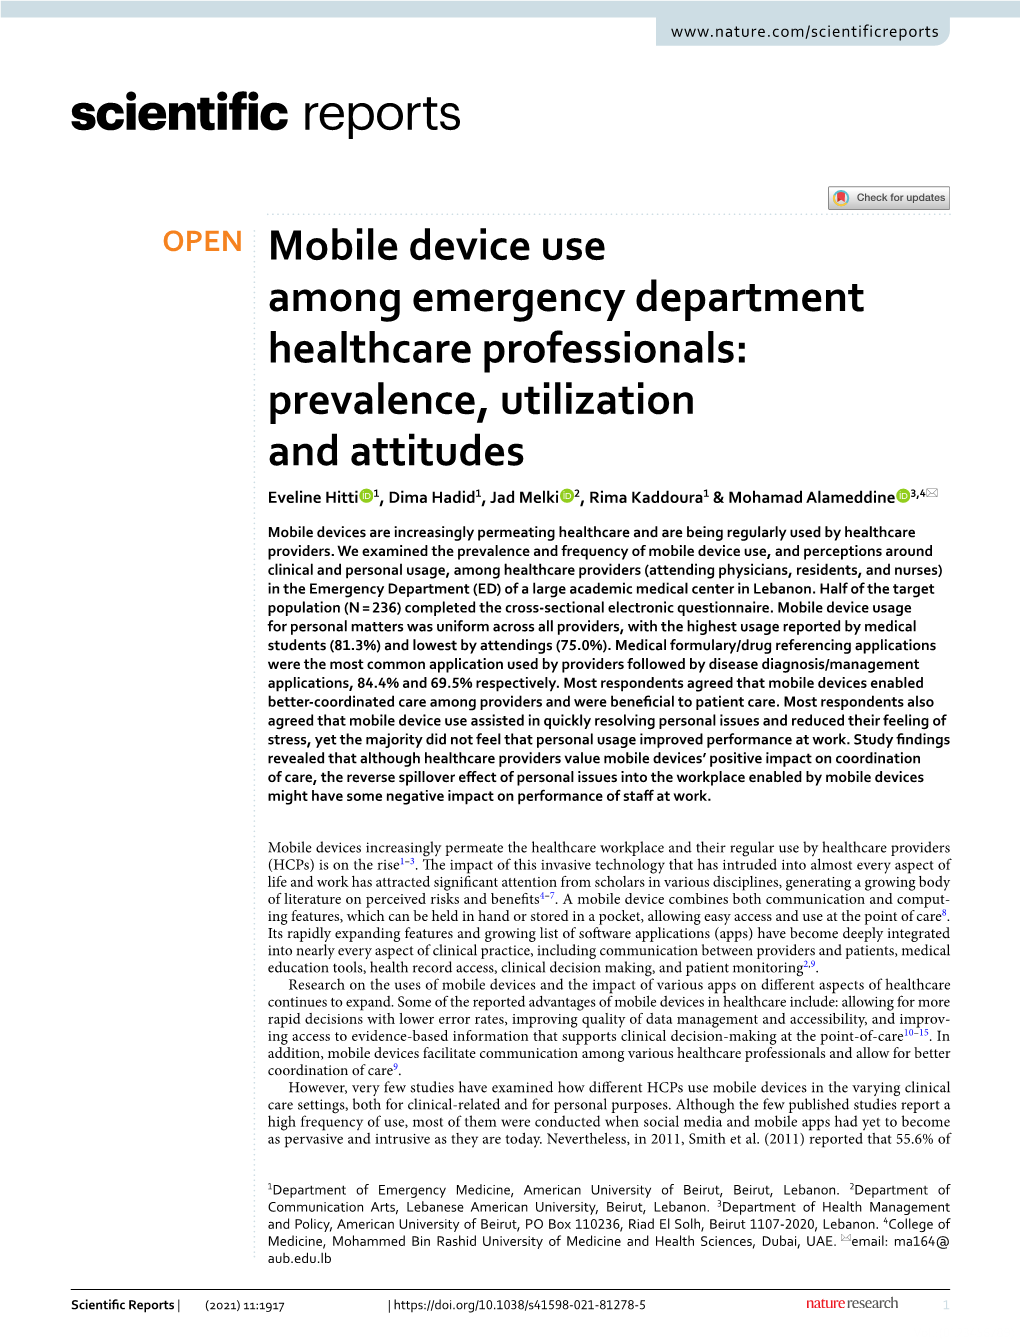 Mobile Device Use Among Emergency Department Healthcare